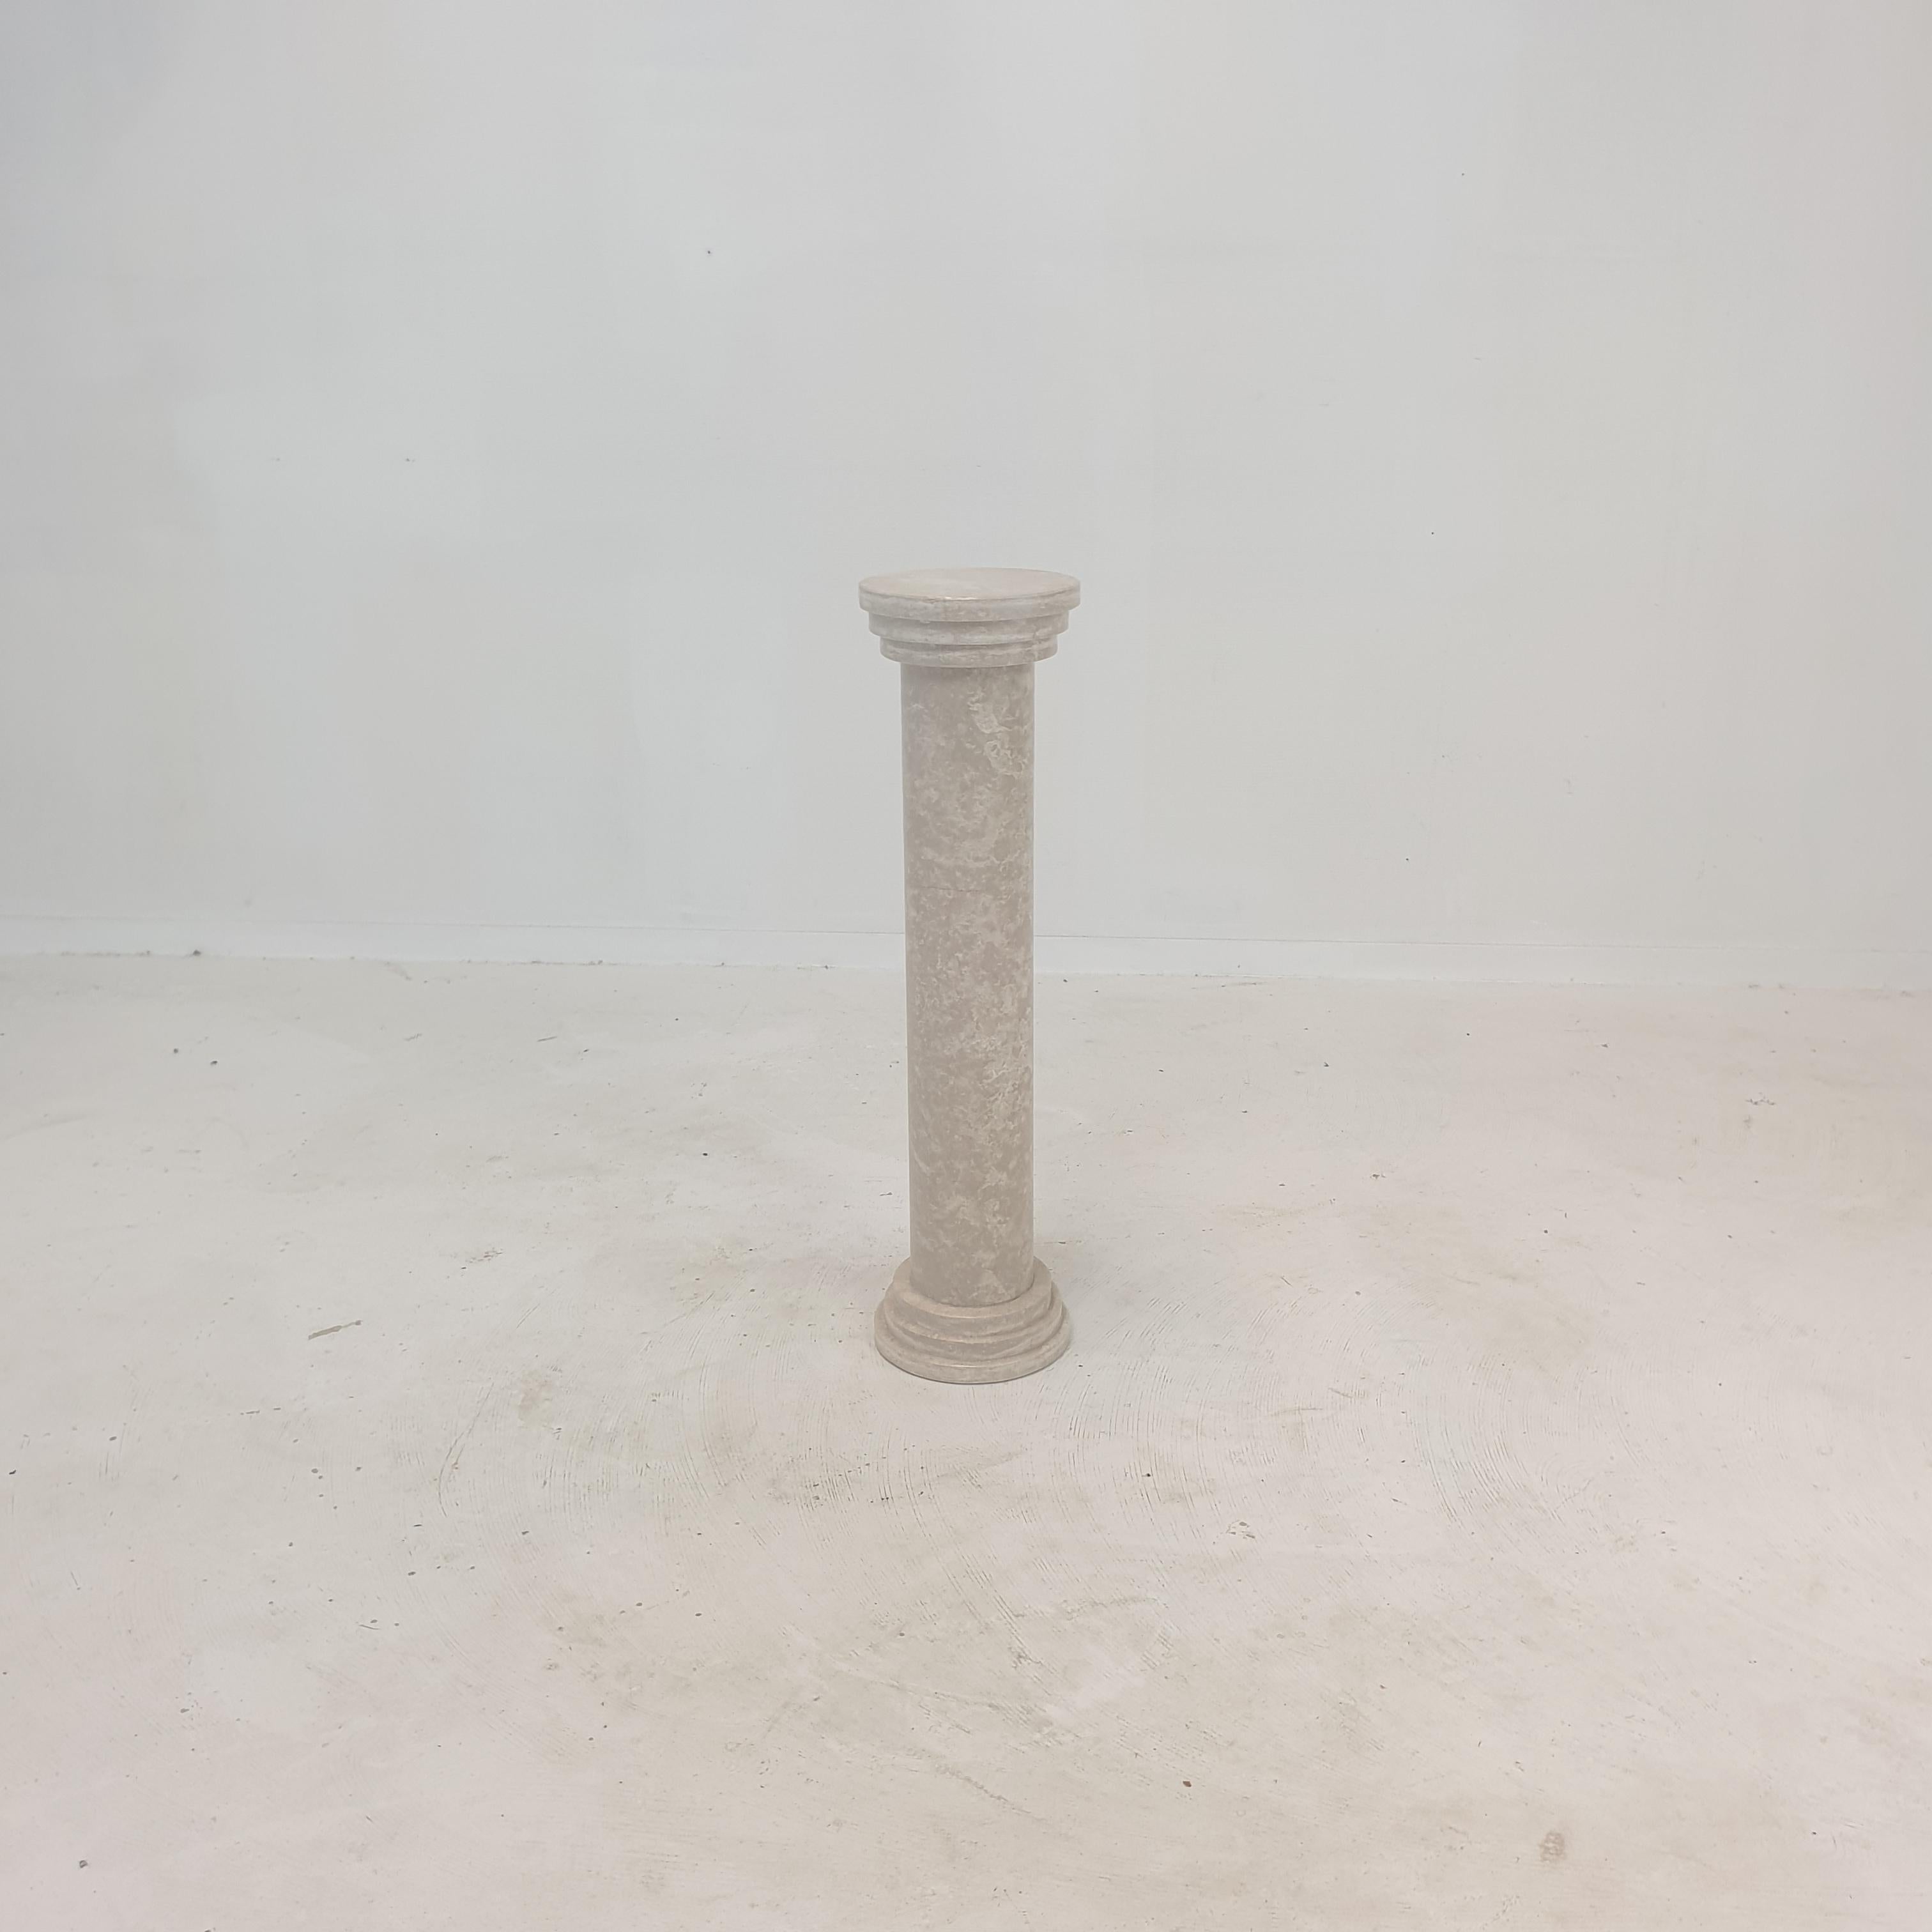 Italian Travertine Side Table or Pedestal, 1980s For Sale 2